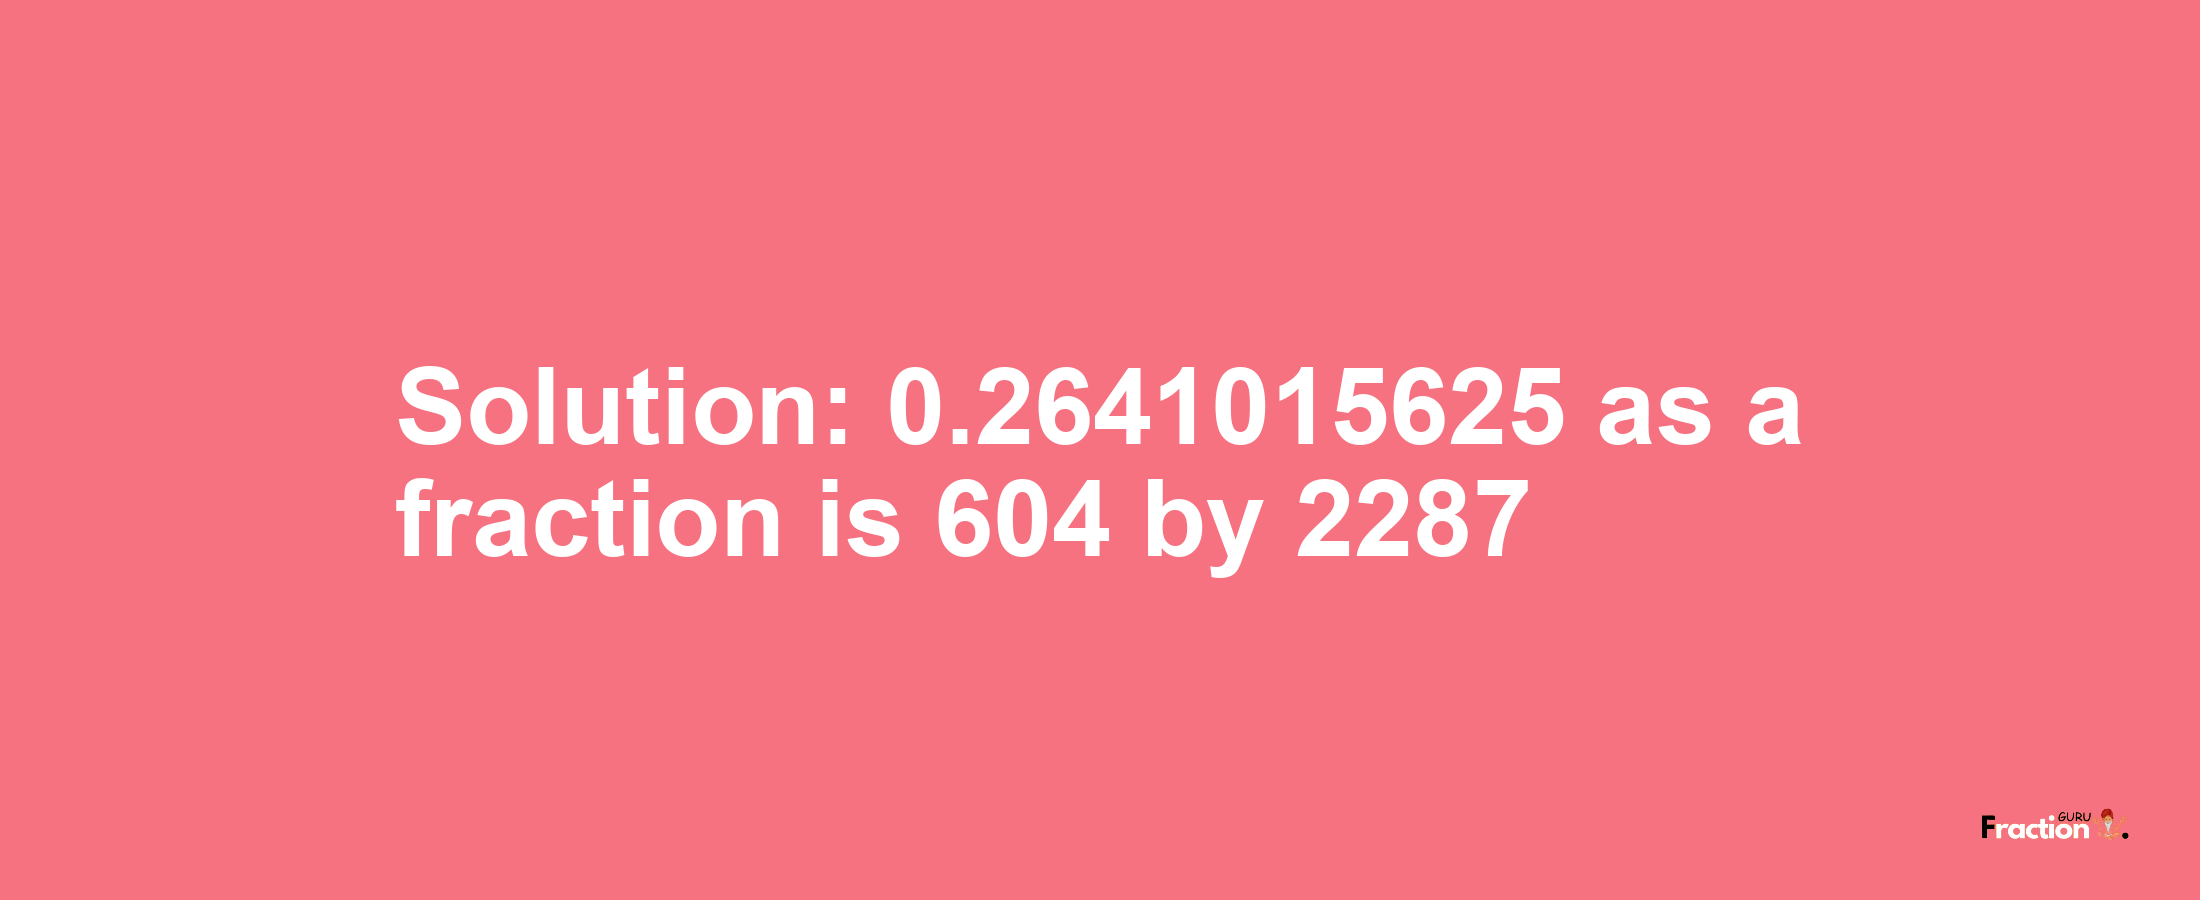 Solution:0.2641015625 as a fraction is 604/2287